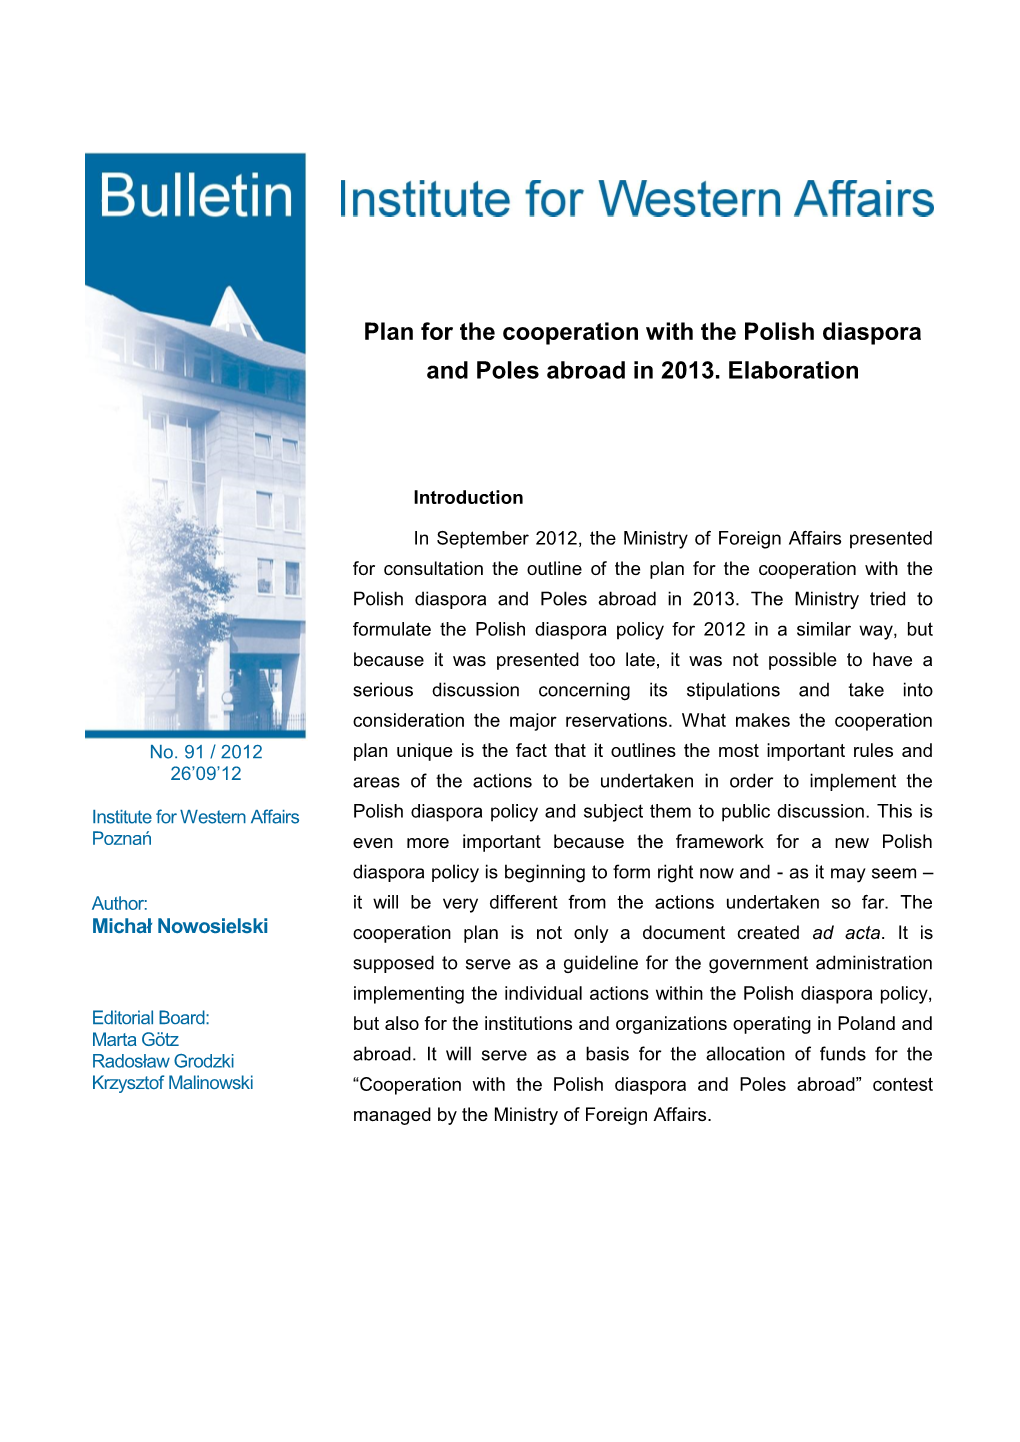 Plan for the Cooperation with the Polish Diaspora and Poles Abroad in 2013